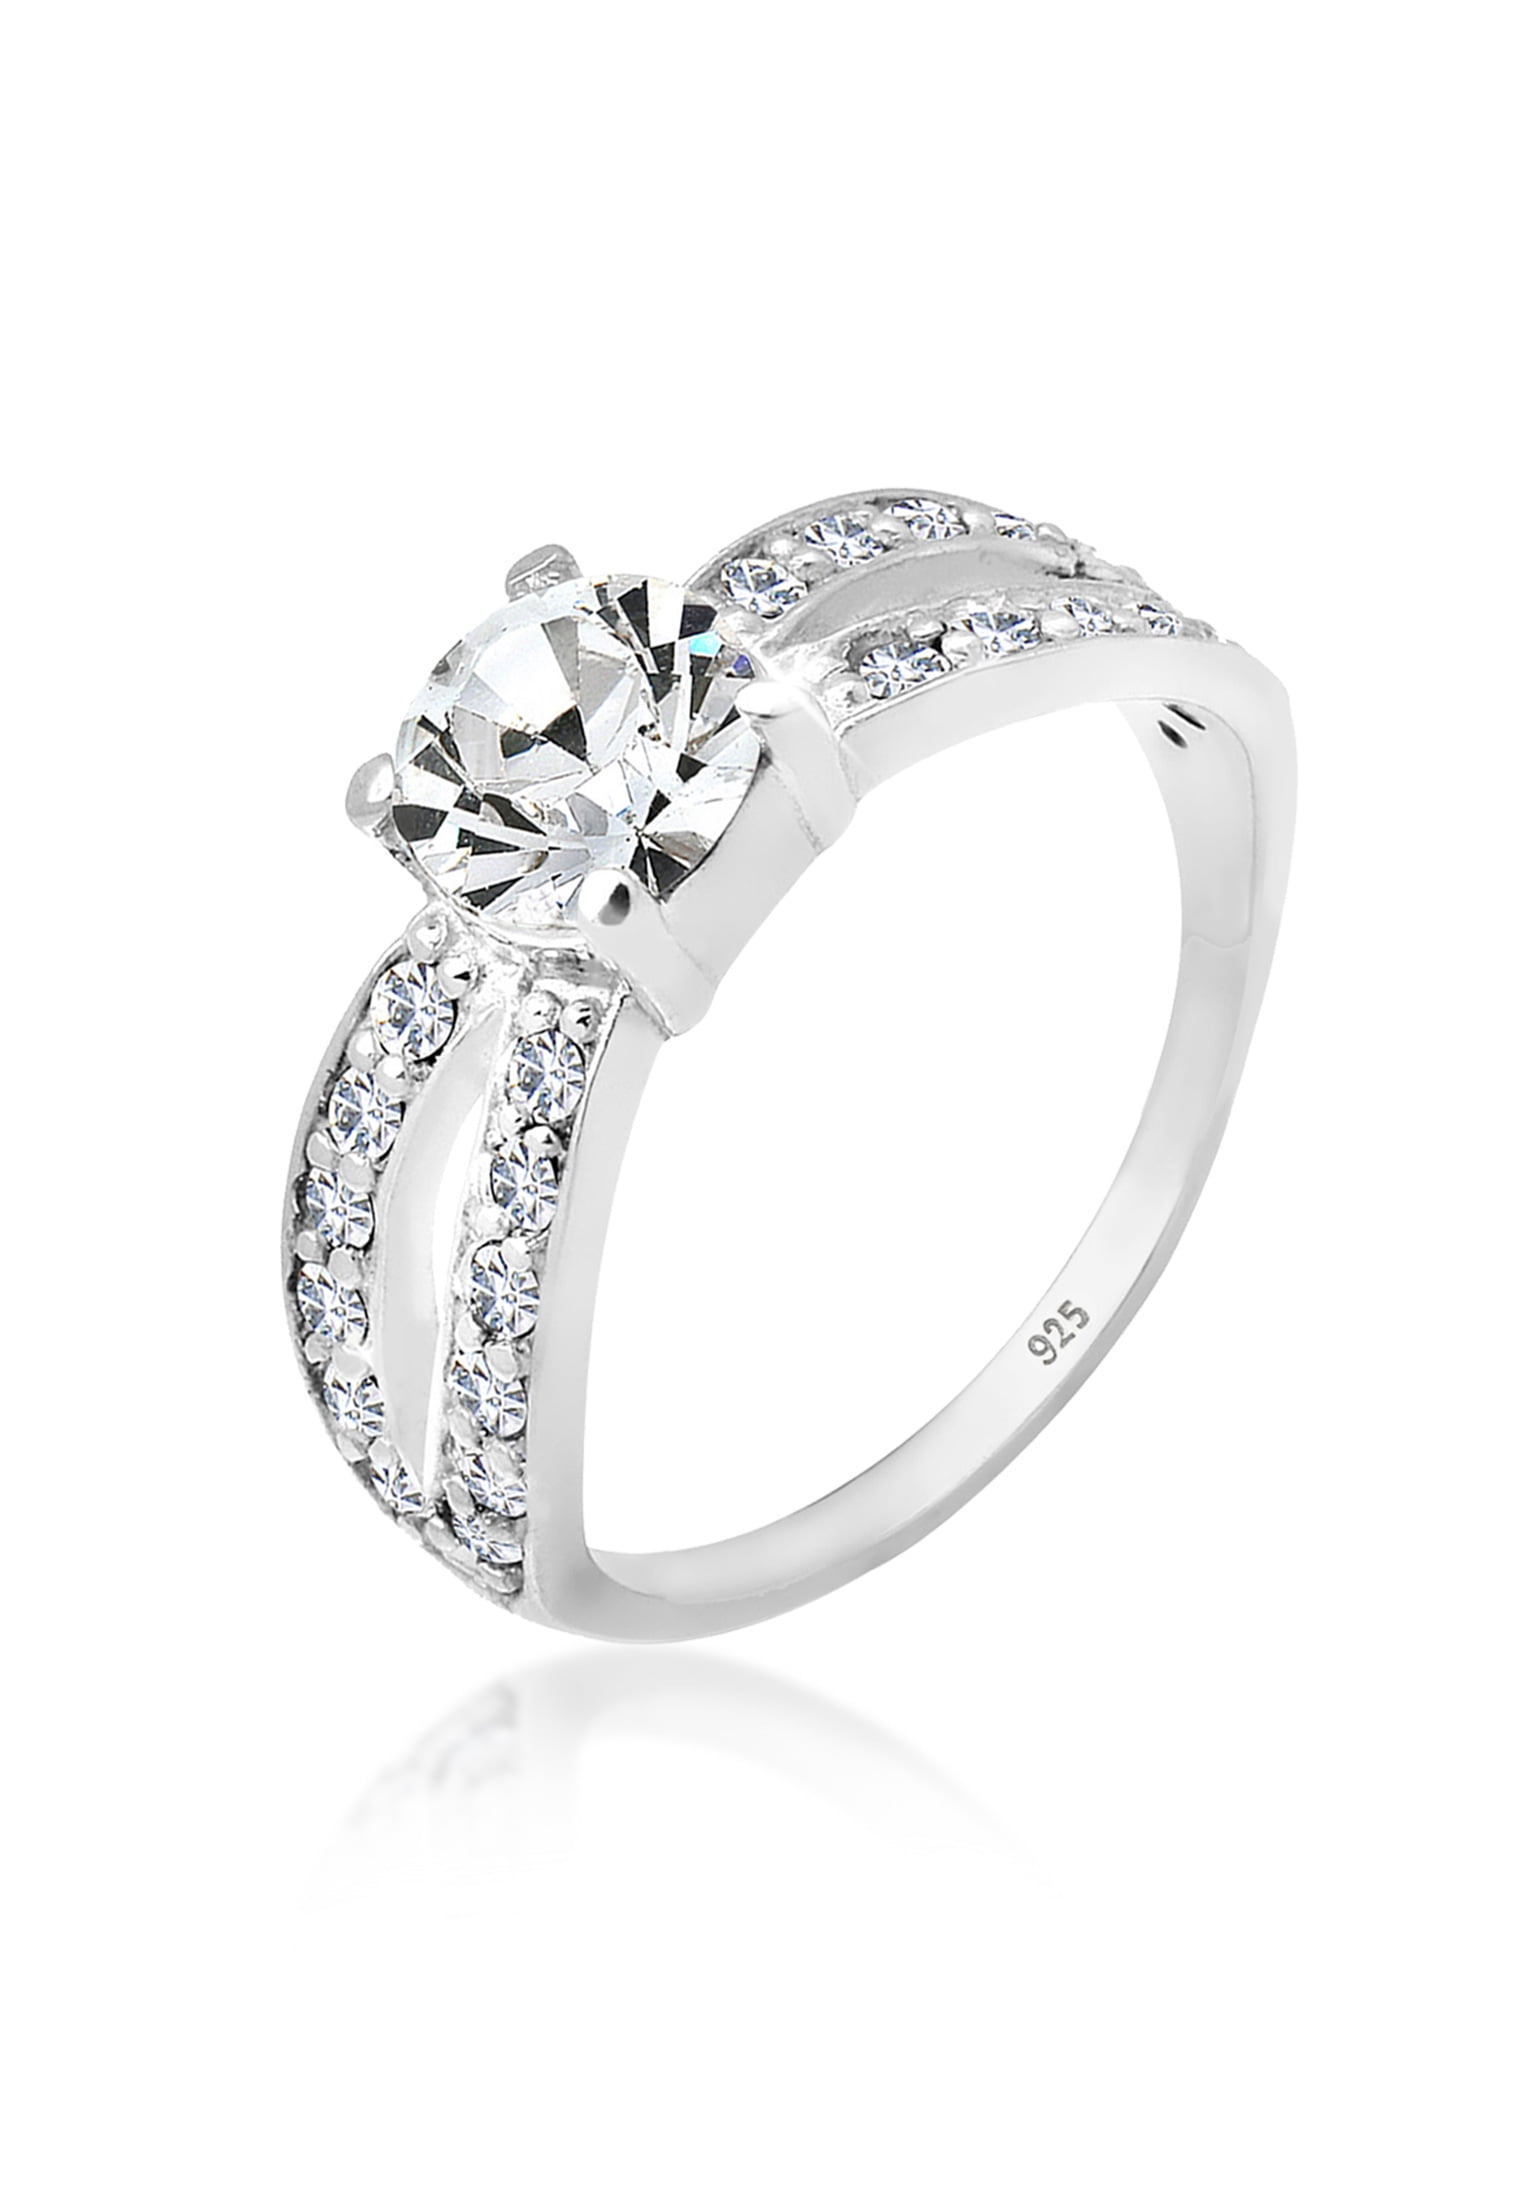 Elli by Julie & Grace Ring Engagement Silver Marquise 925 Crystal Anniversary